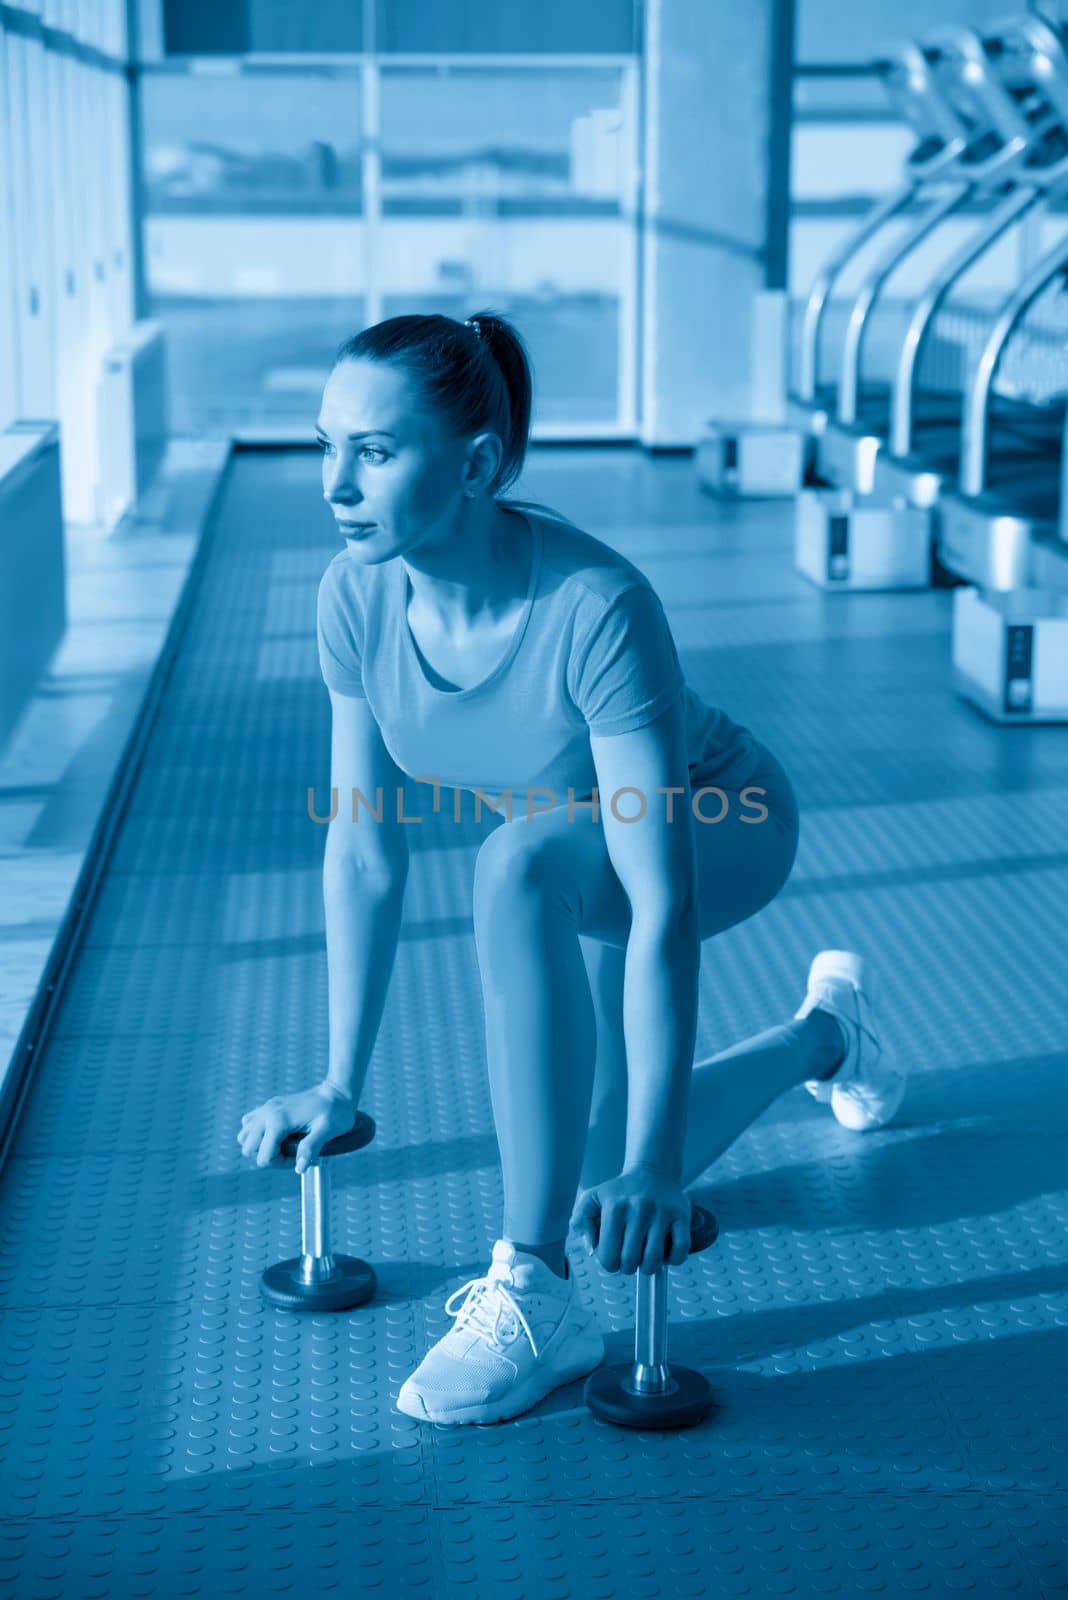 Physically fit woman at the gym with dumbbells ready to strengthen her arms and biceps by Mariakray